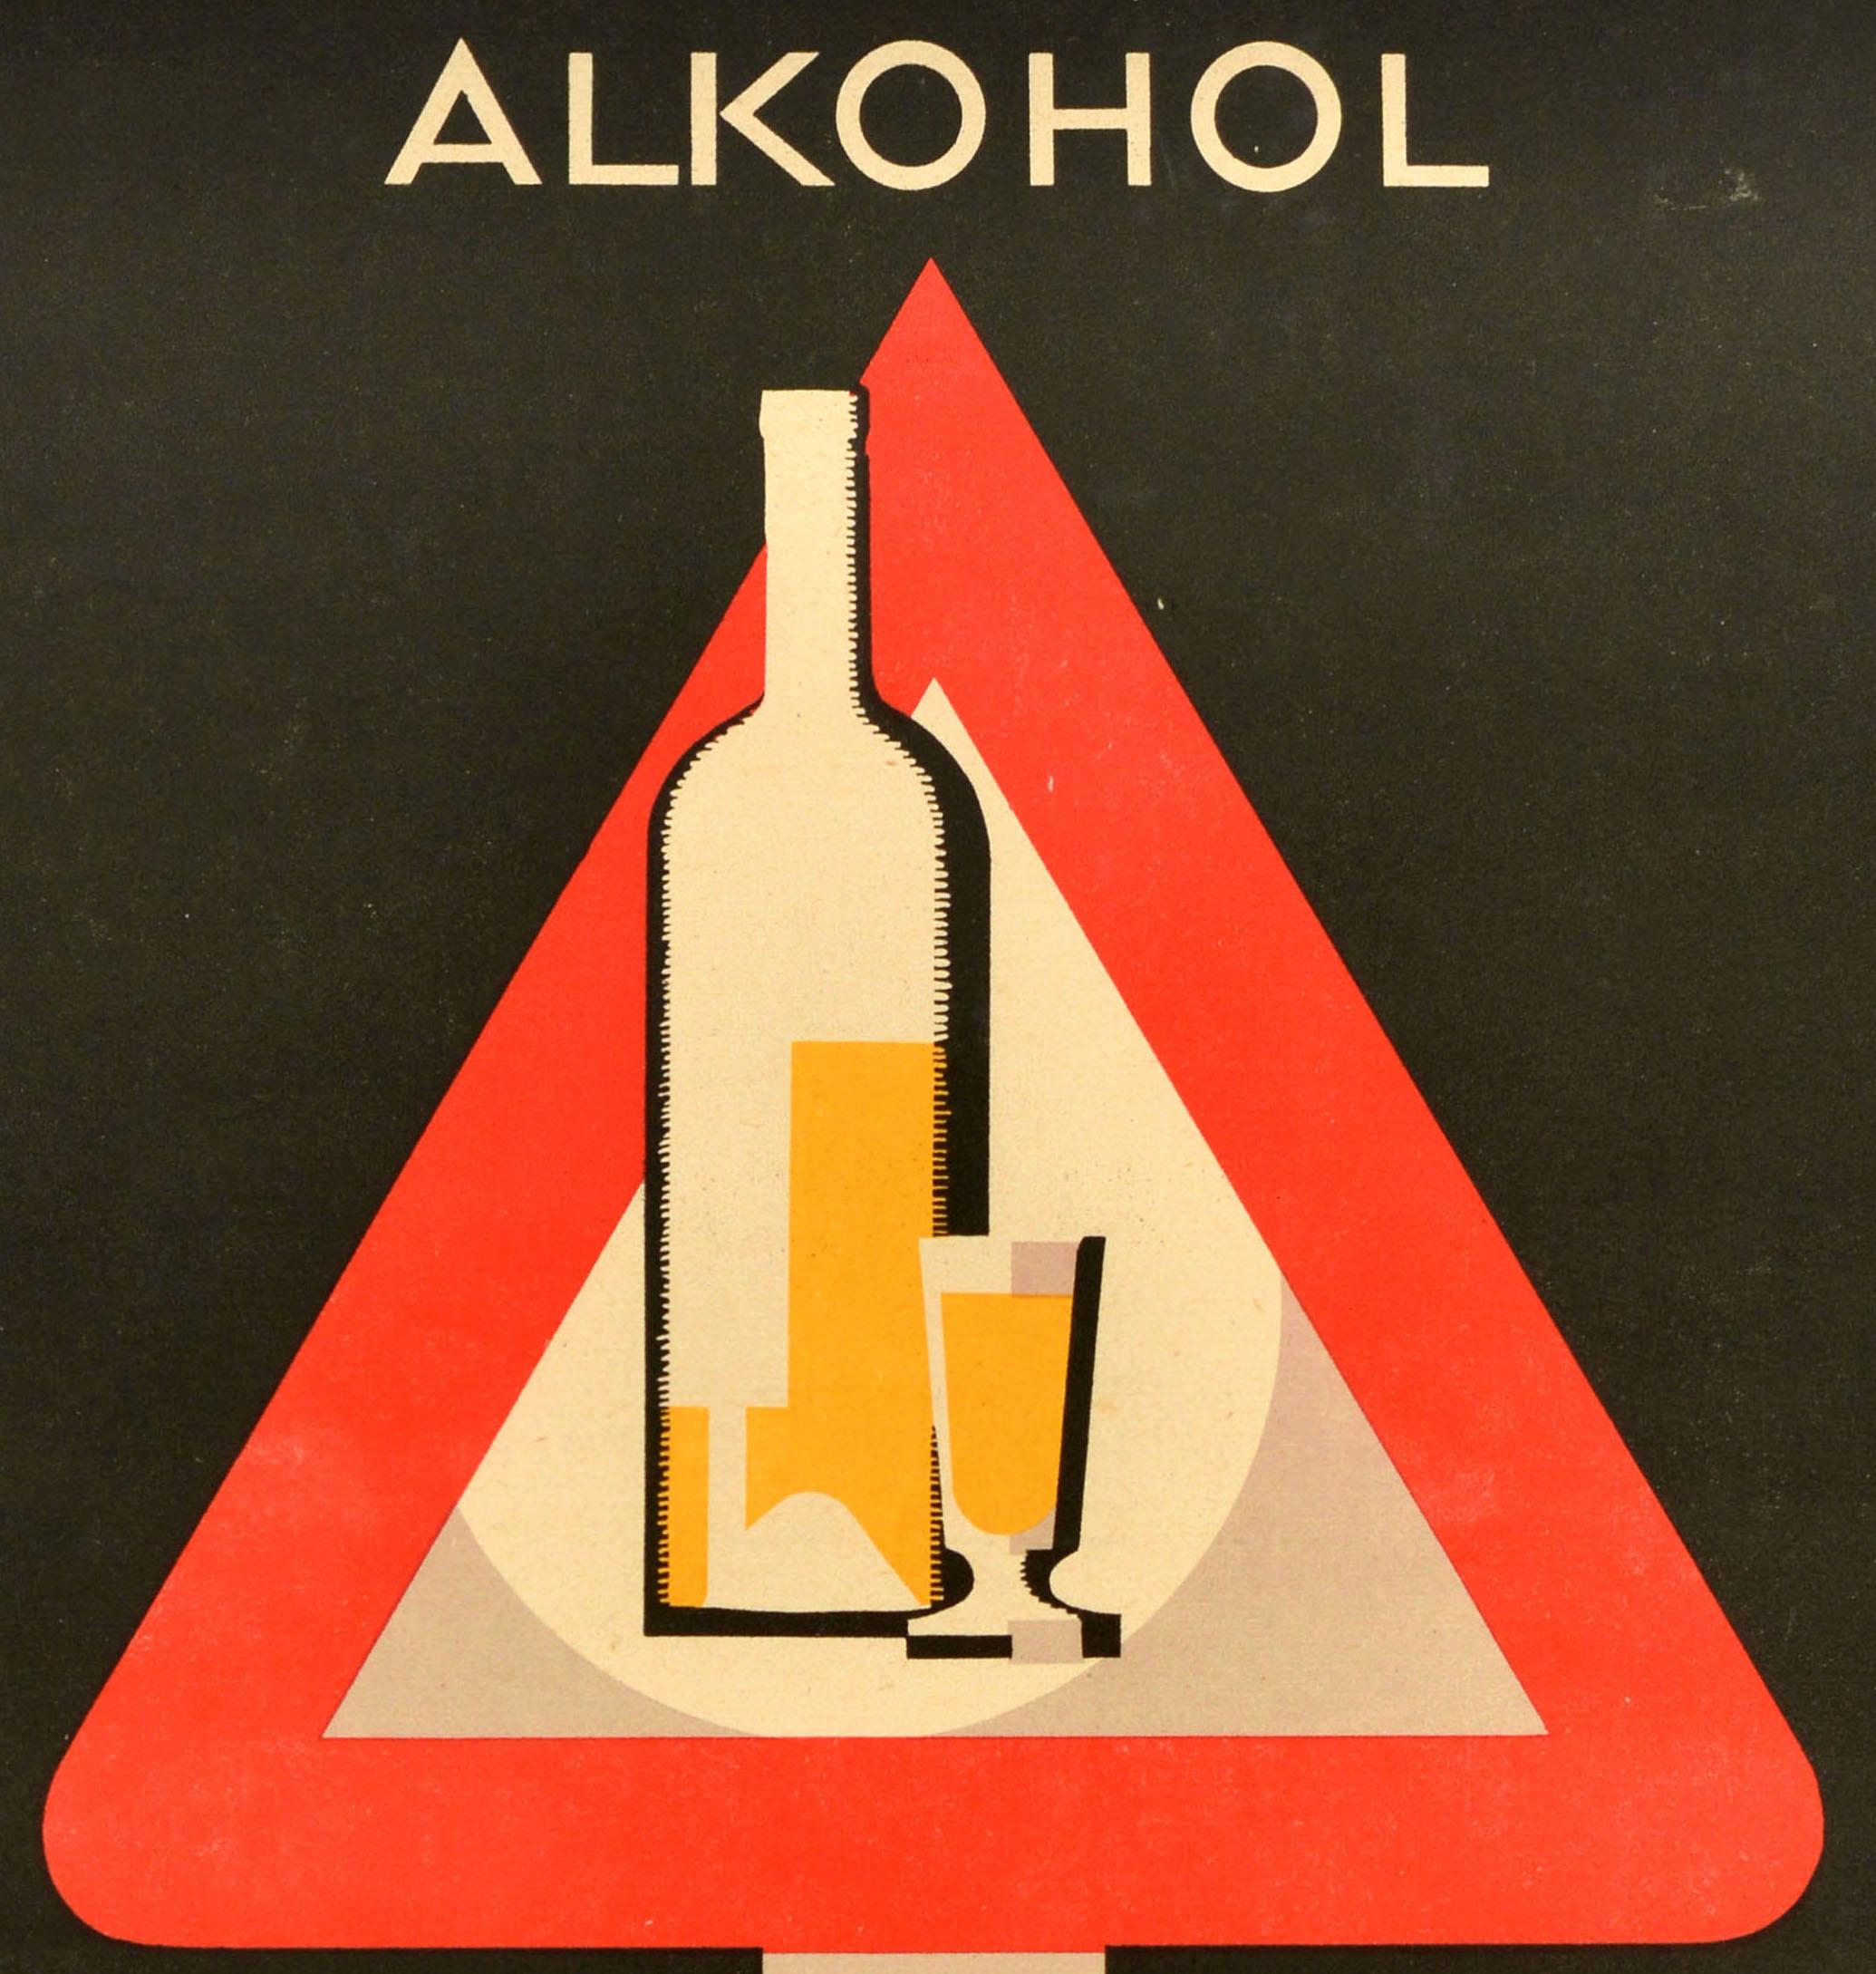 Original vintage anti-alcoholism propaganda poster - Alcohol Poisons Robs Kills / Alkohol Otravi Okrade Zabije - featuring a street sign style design depicting a bottle and glass on a red triangle warning sign set against a black background, the